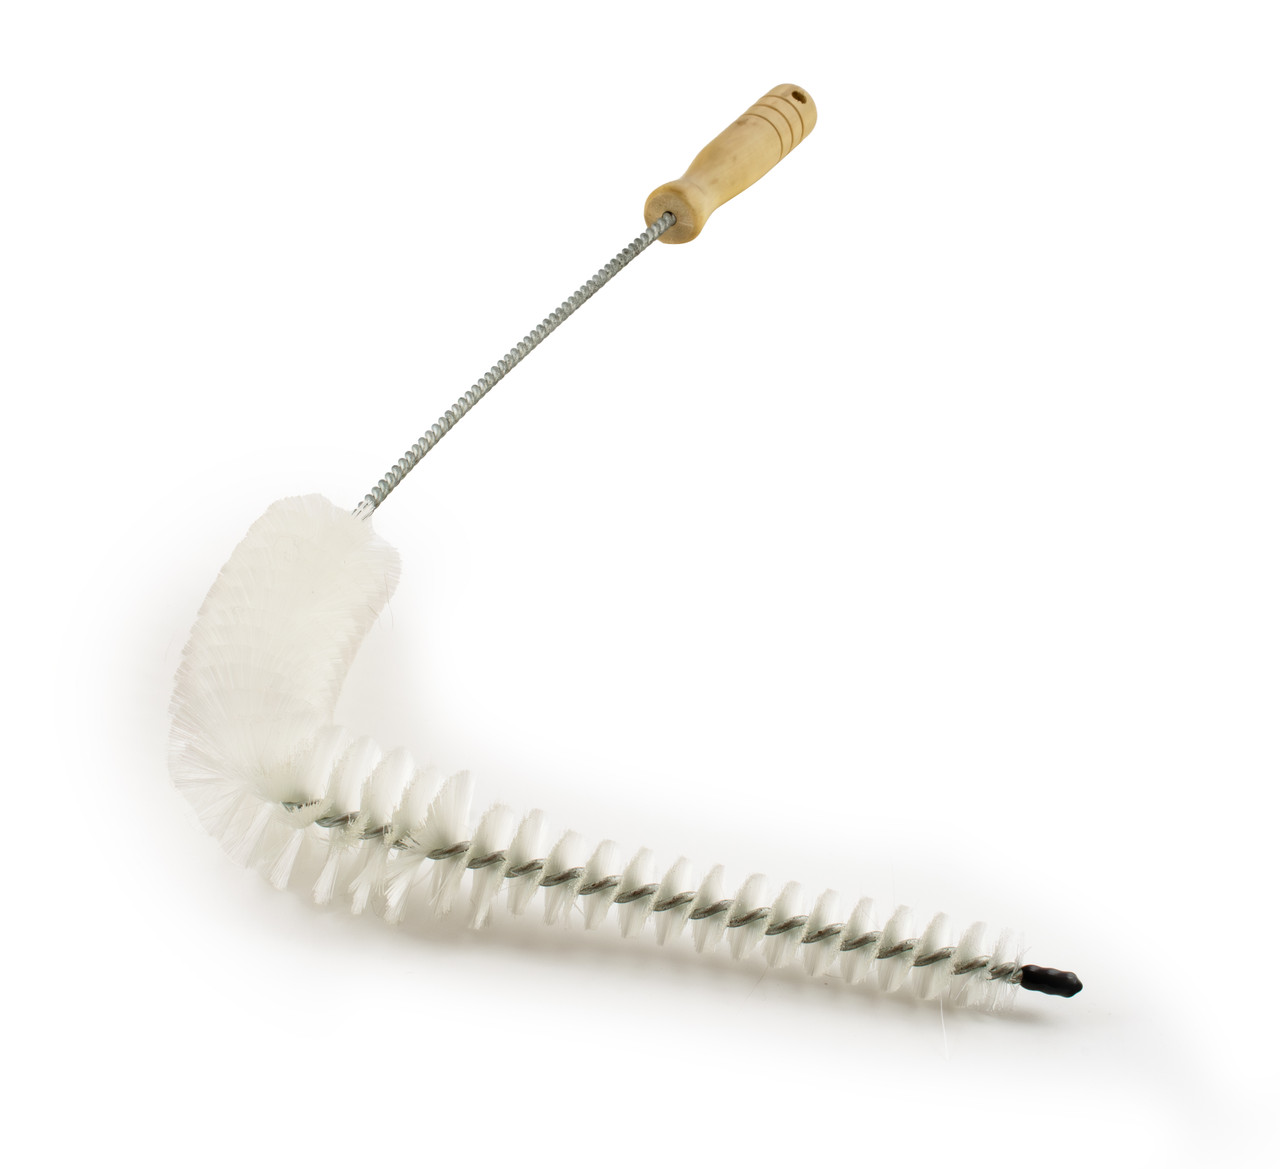 how to use a refrigerator coil brush